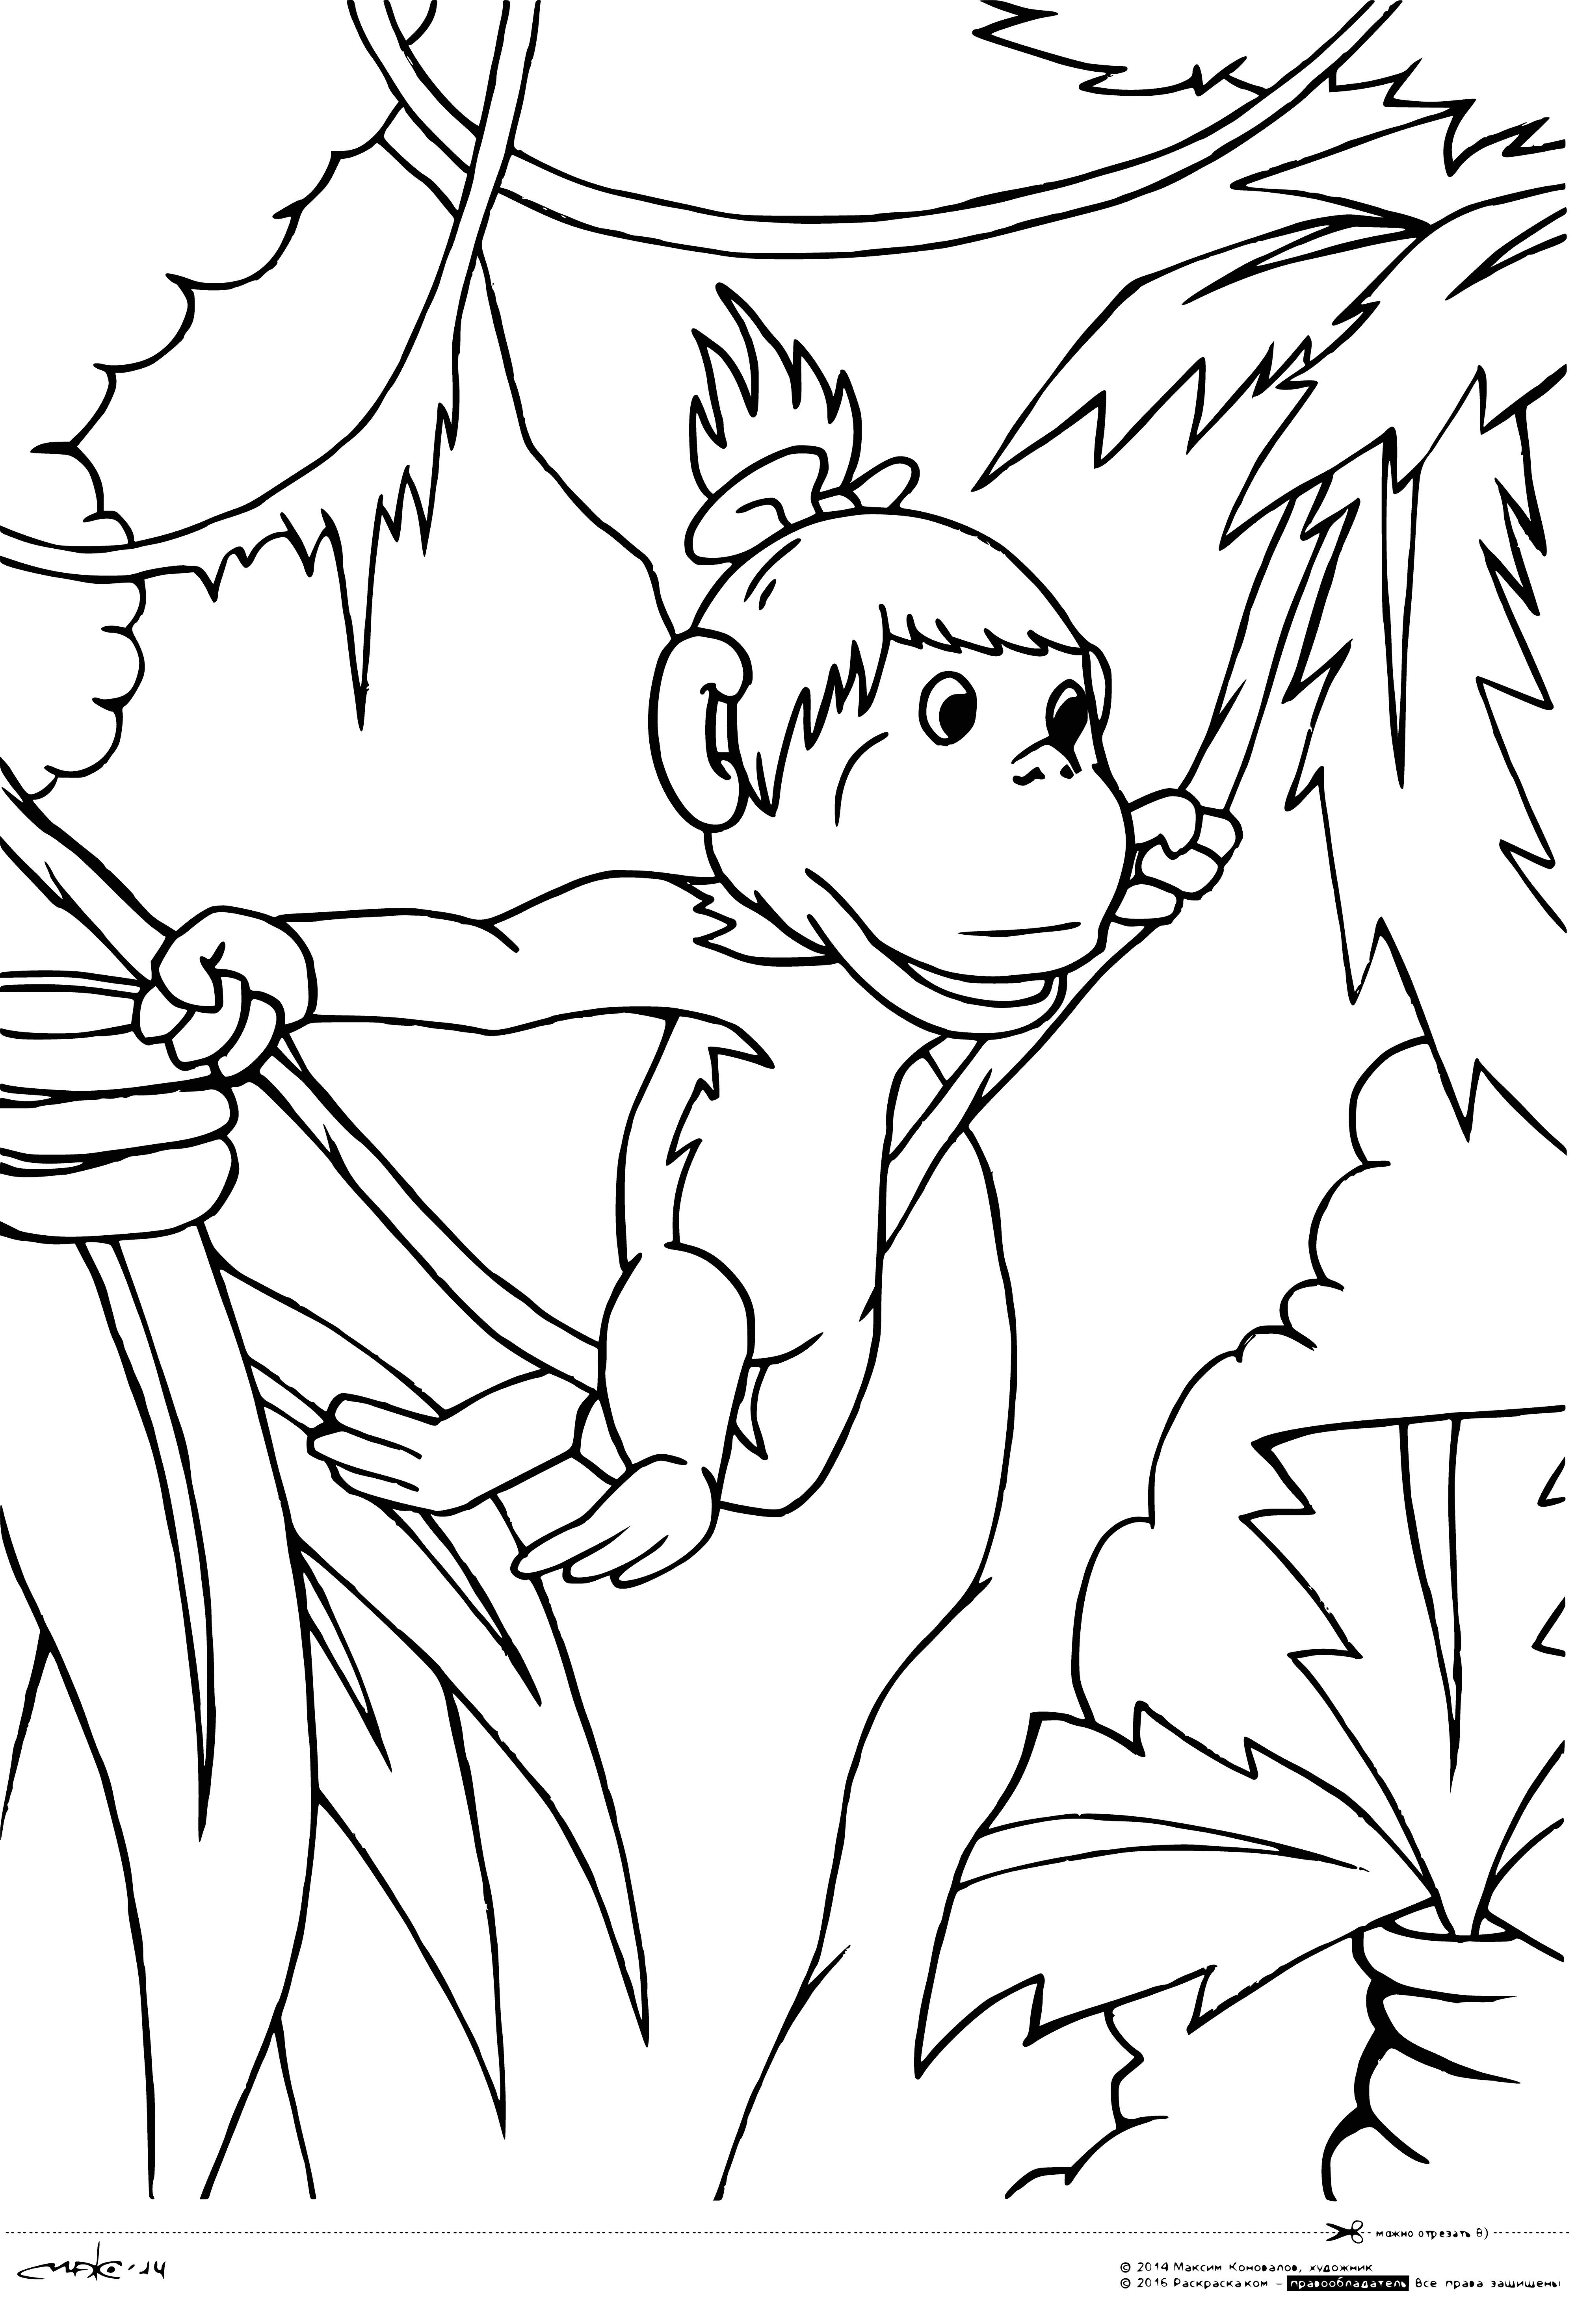 coloring page: 38 parrots in different colors: mostly green w/ yellow/red markings. All appear healthy & active, perching & swinging from branches.